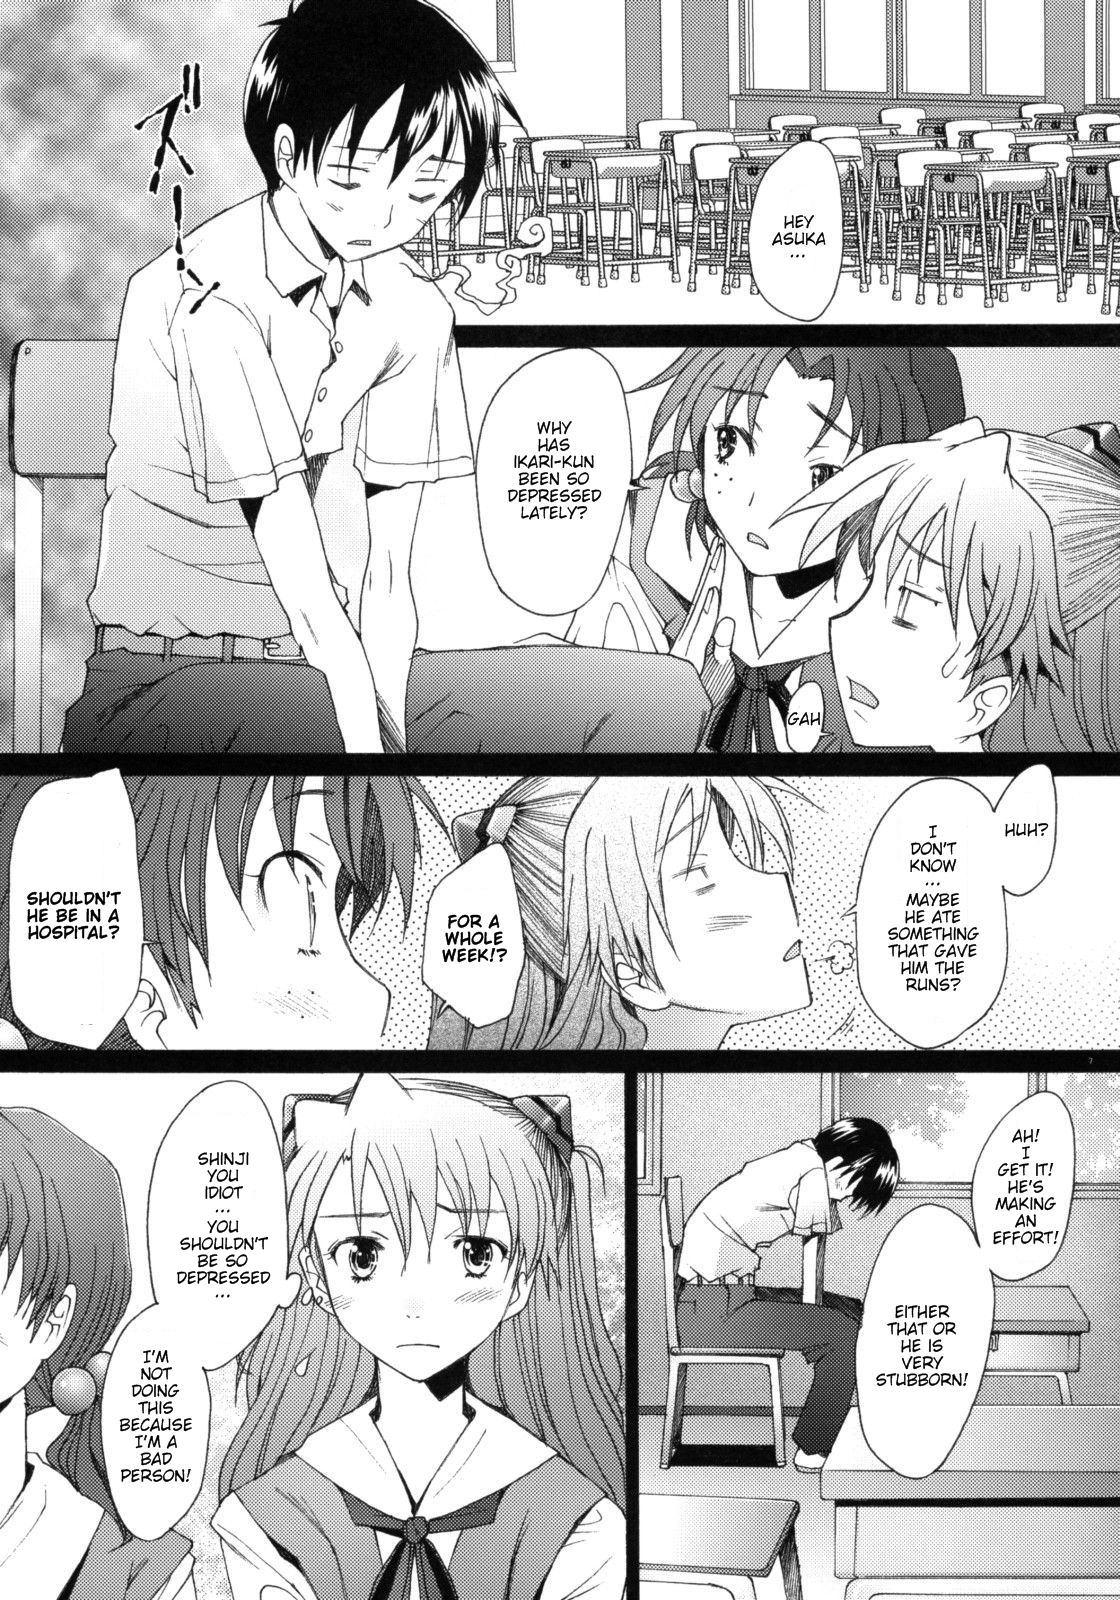 Natural Boobs Confusion LEVEL A vol.2 - Neon genesis evangelion Bed - Page 6